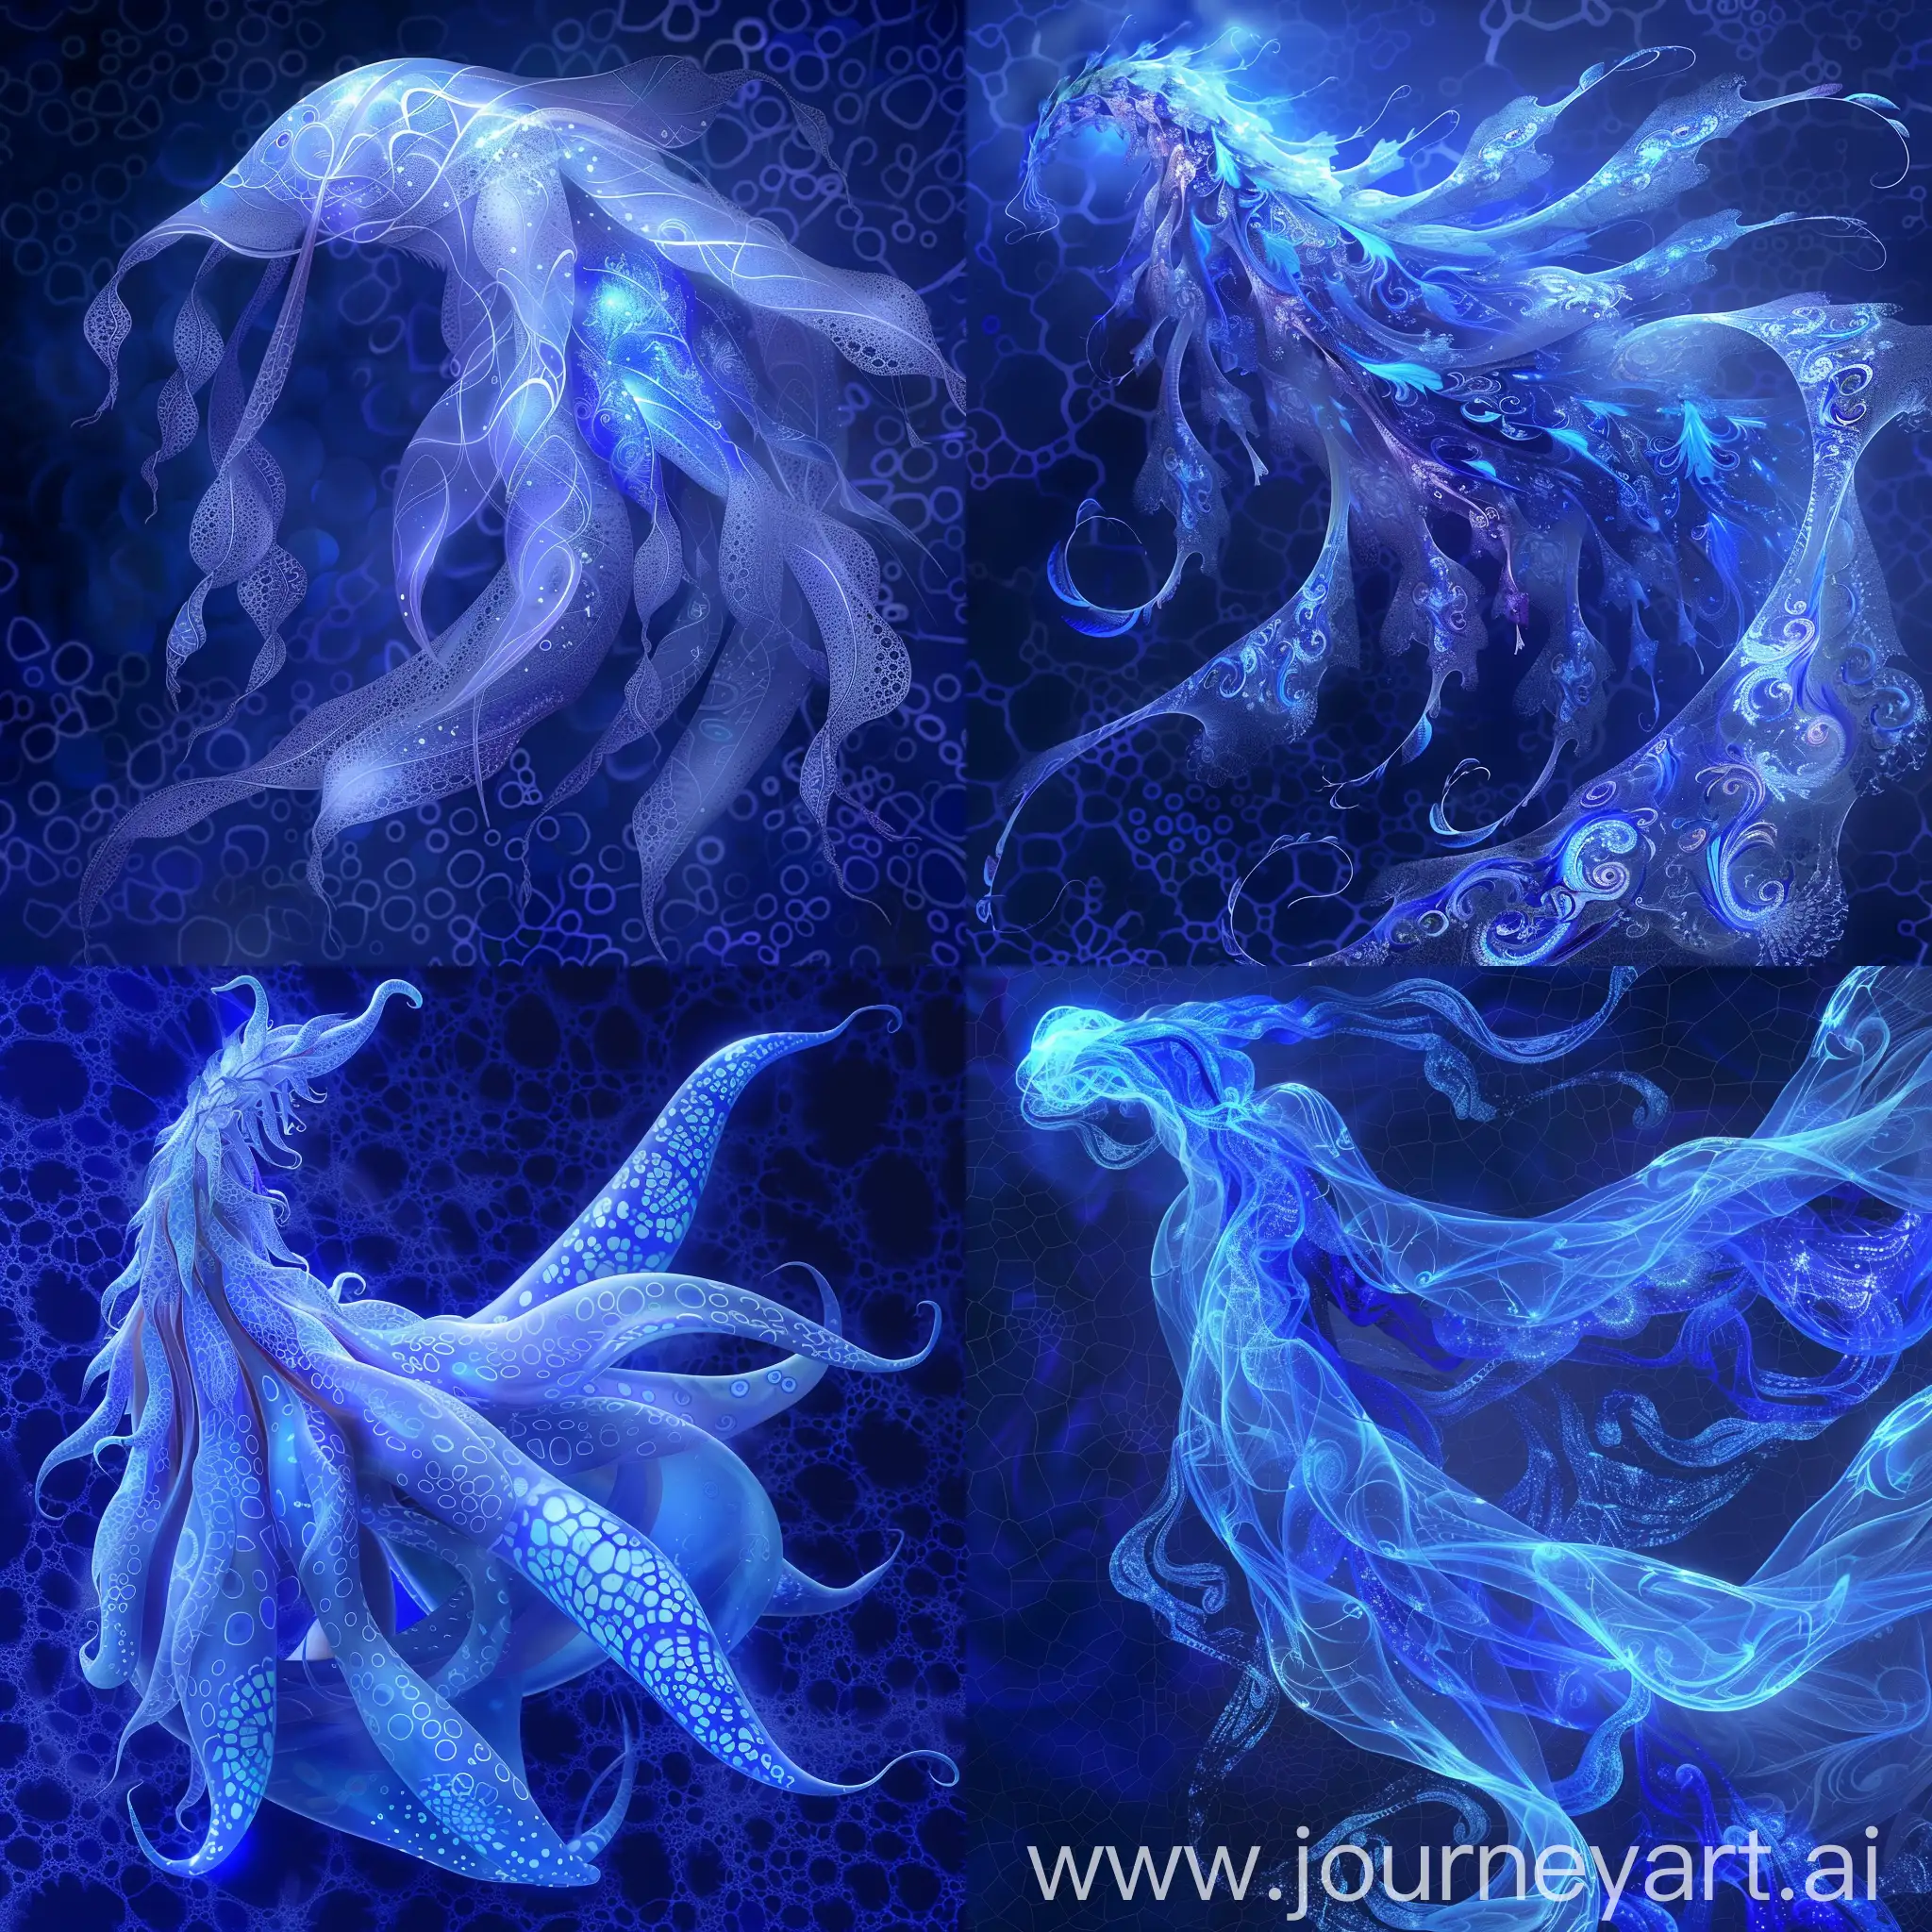 Visualize a (((fantastical surrealistic whimisical creature))) composed entirely of flowing periwinkle silk with intricate designs and ethereal patterns that give off magnificent bioluminescence. Its form and detailing suggest an otherworldly wonder that defies the realm of reality background should be deep blue fractal crackle swirls
